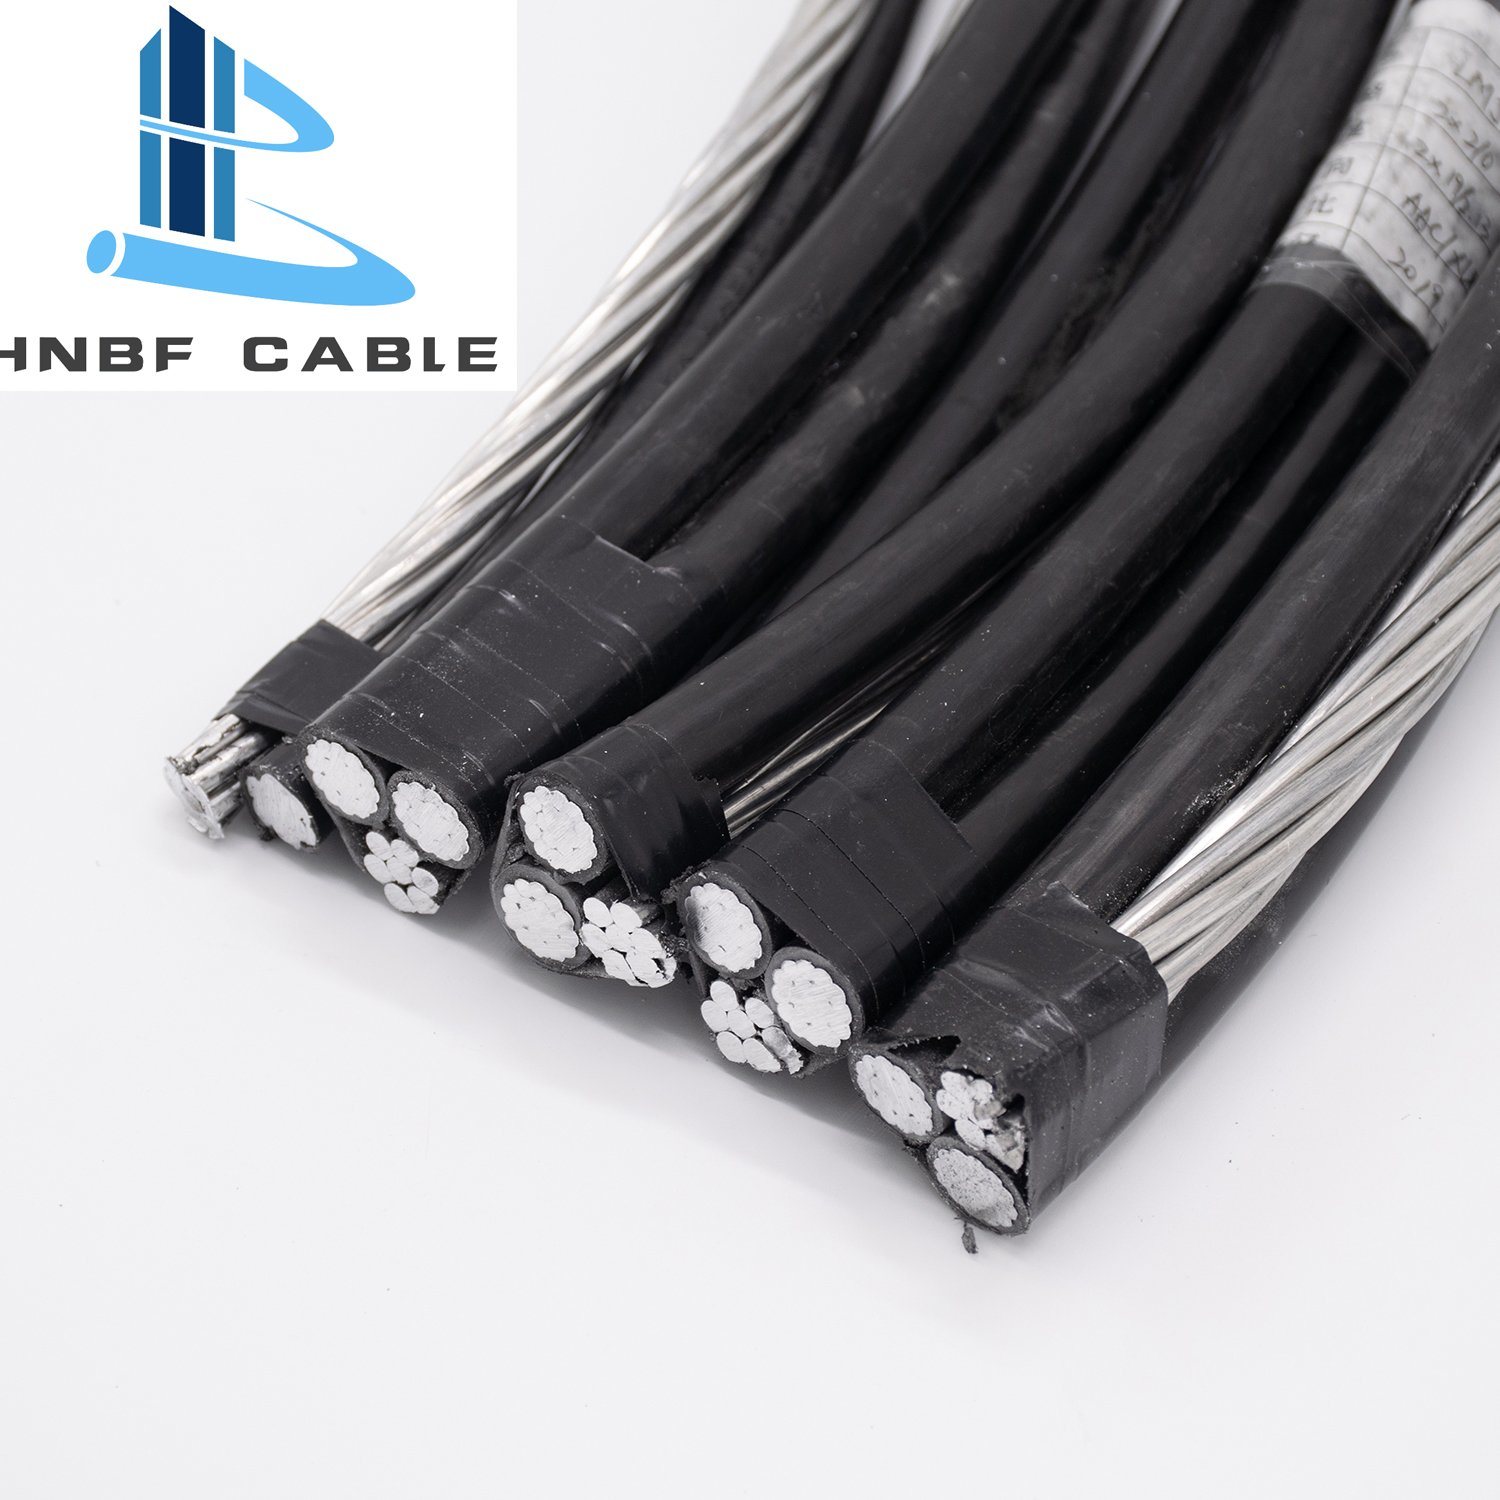 Electric Overhead Cable Triplex Service Drop Cable 4/0AWG Coquina Tusk Apus Portunus ABC Cable